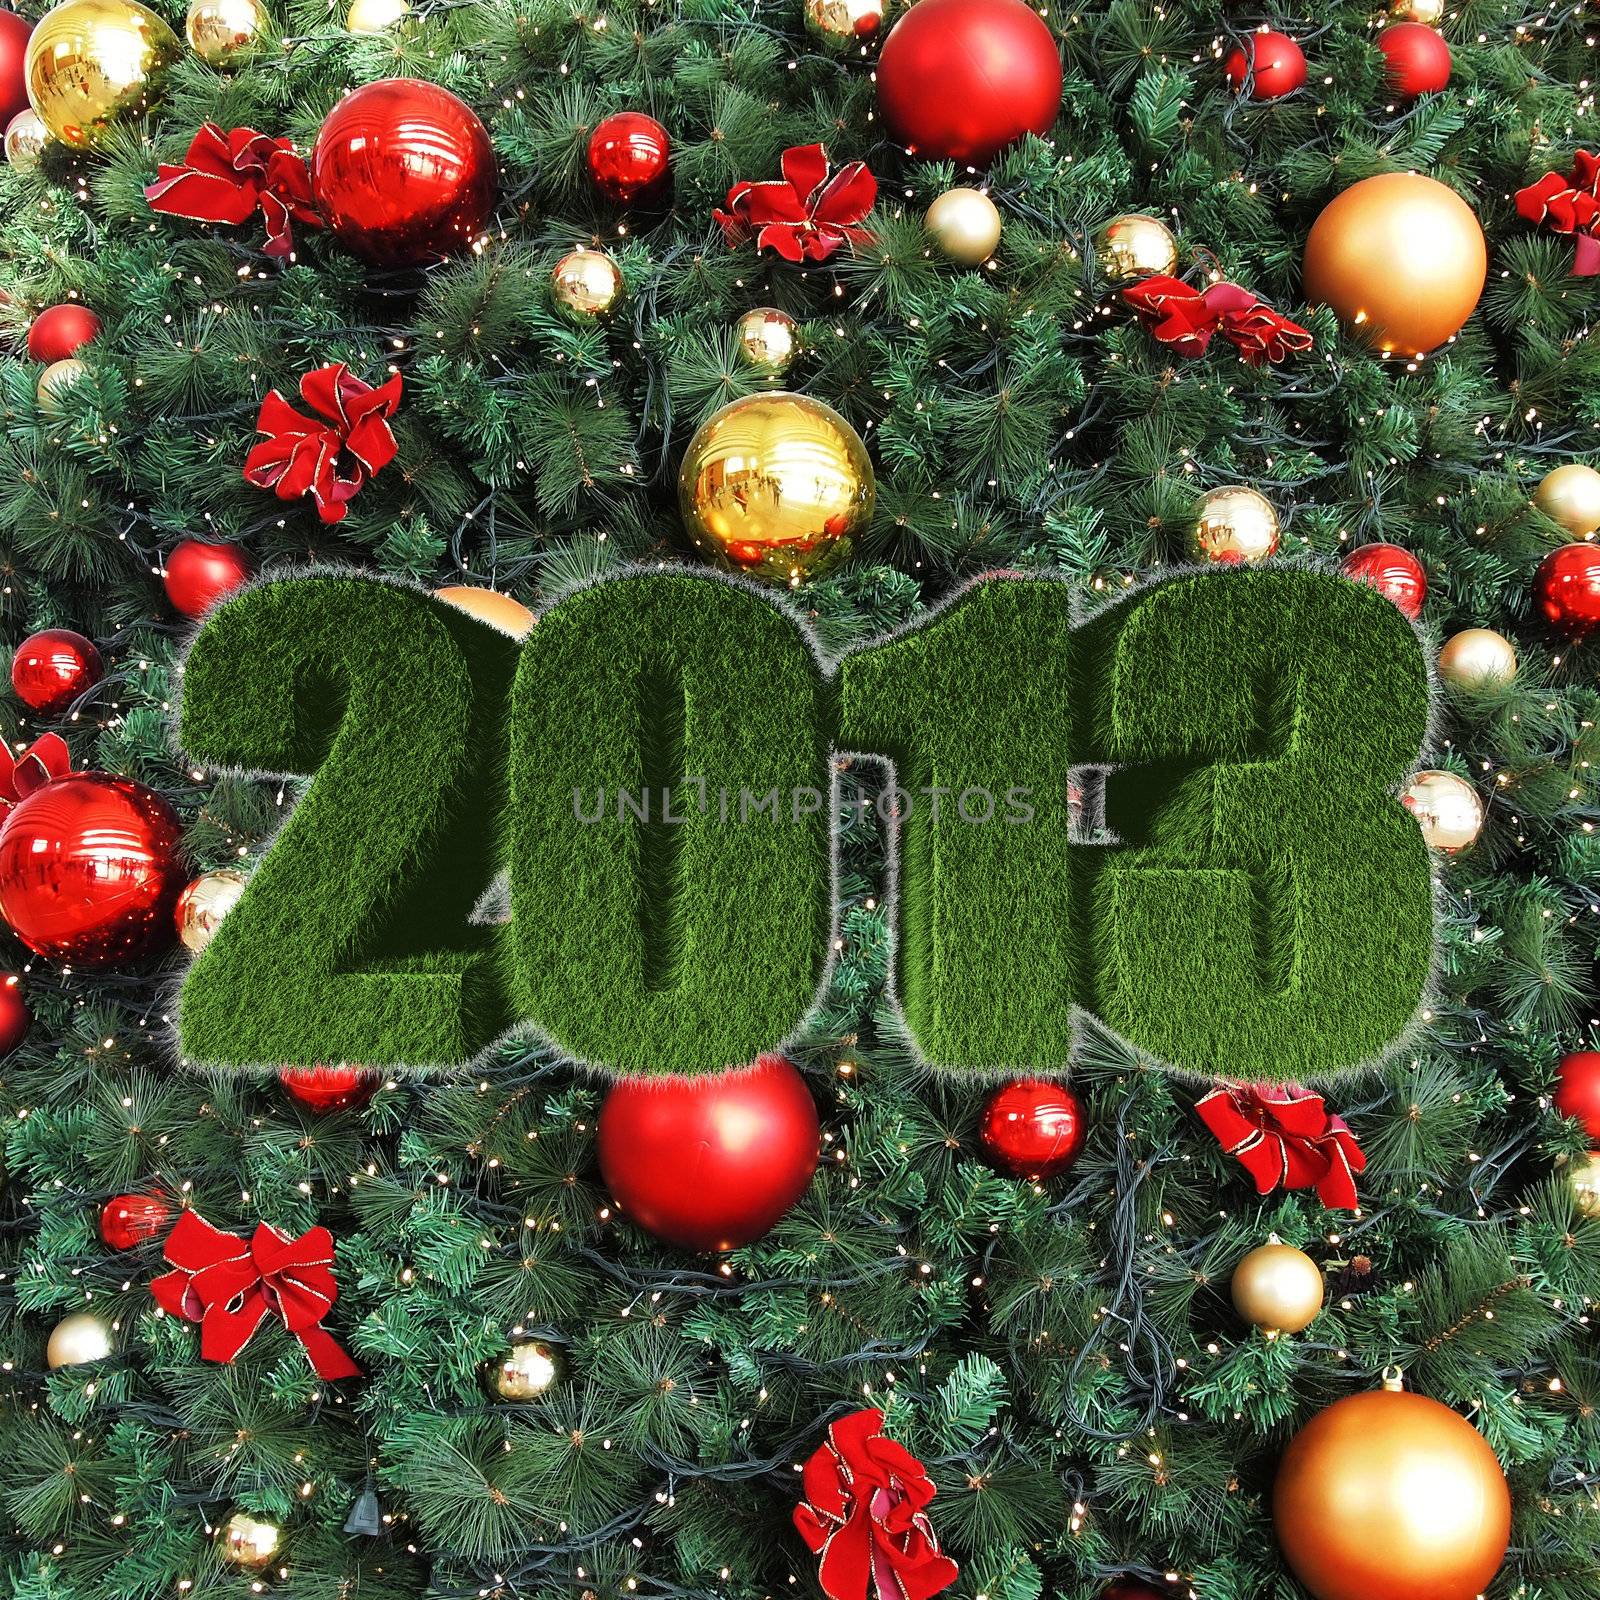 2013 New Year sign on christmass tree decorations by siraanamwong